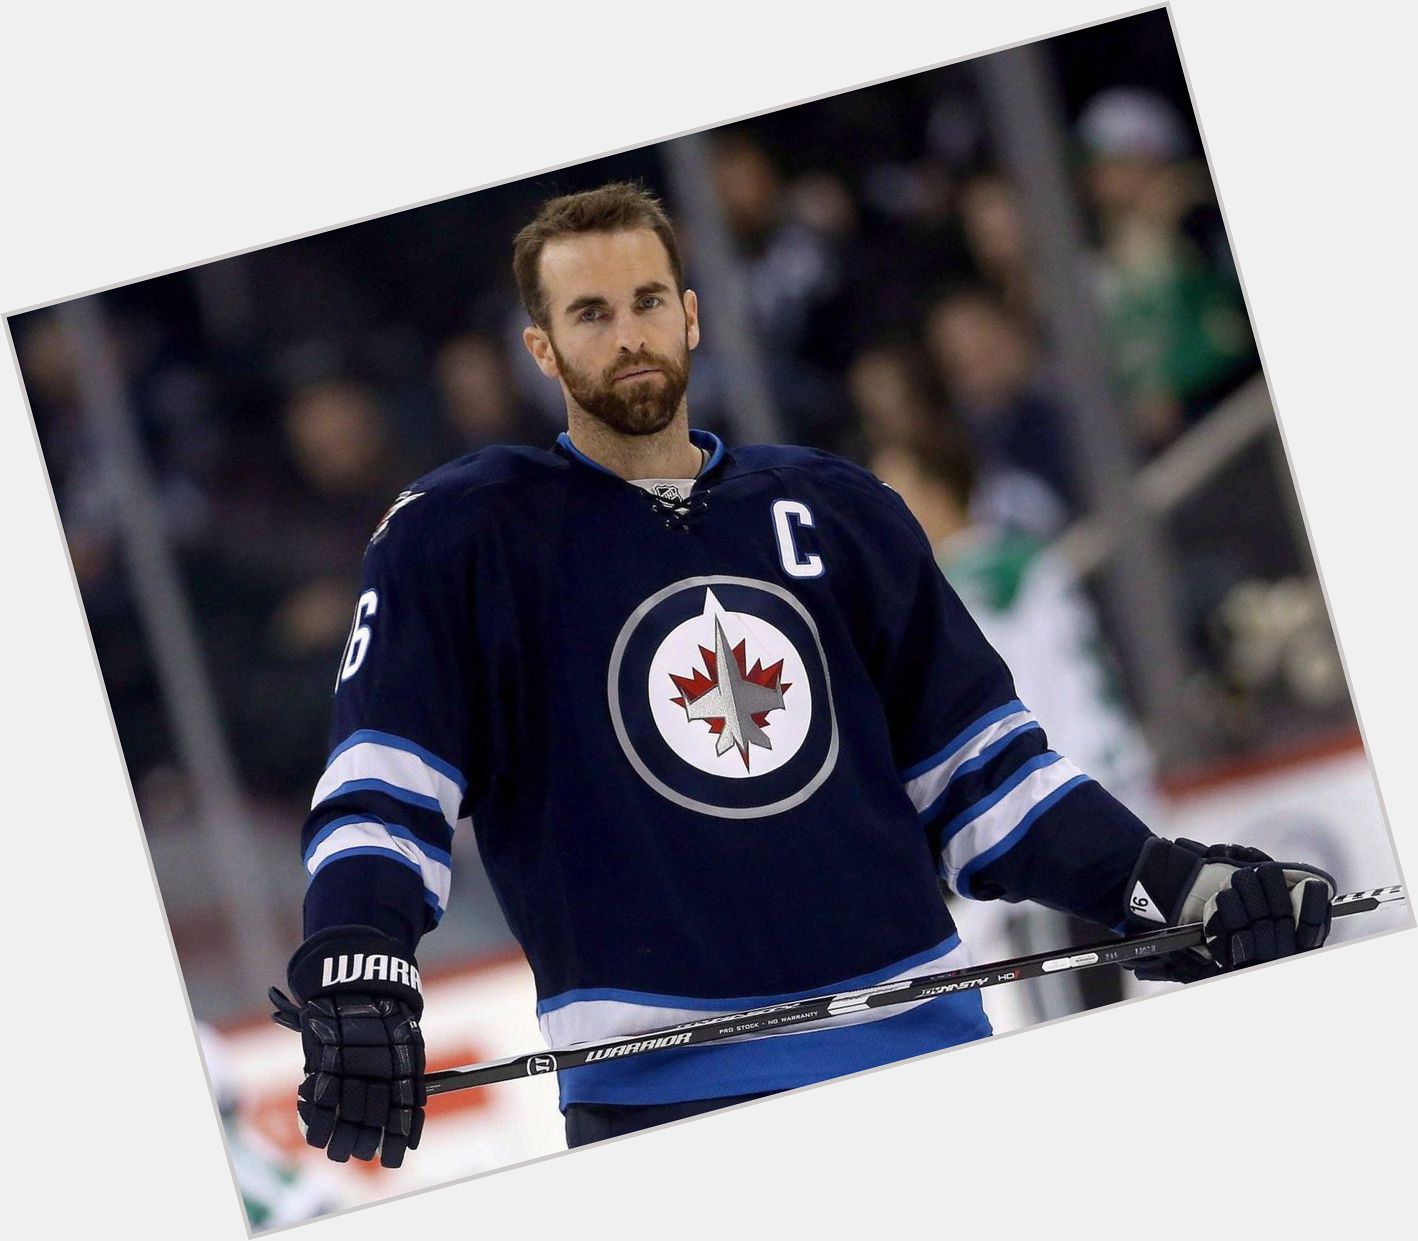 Http://fanpagepress.net/m/A/andrew Ladd Stanley Cup 3